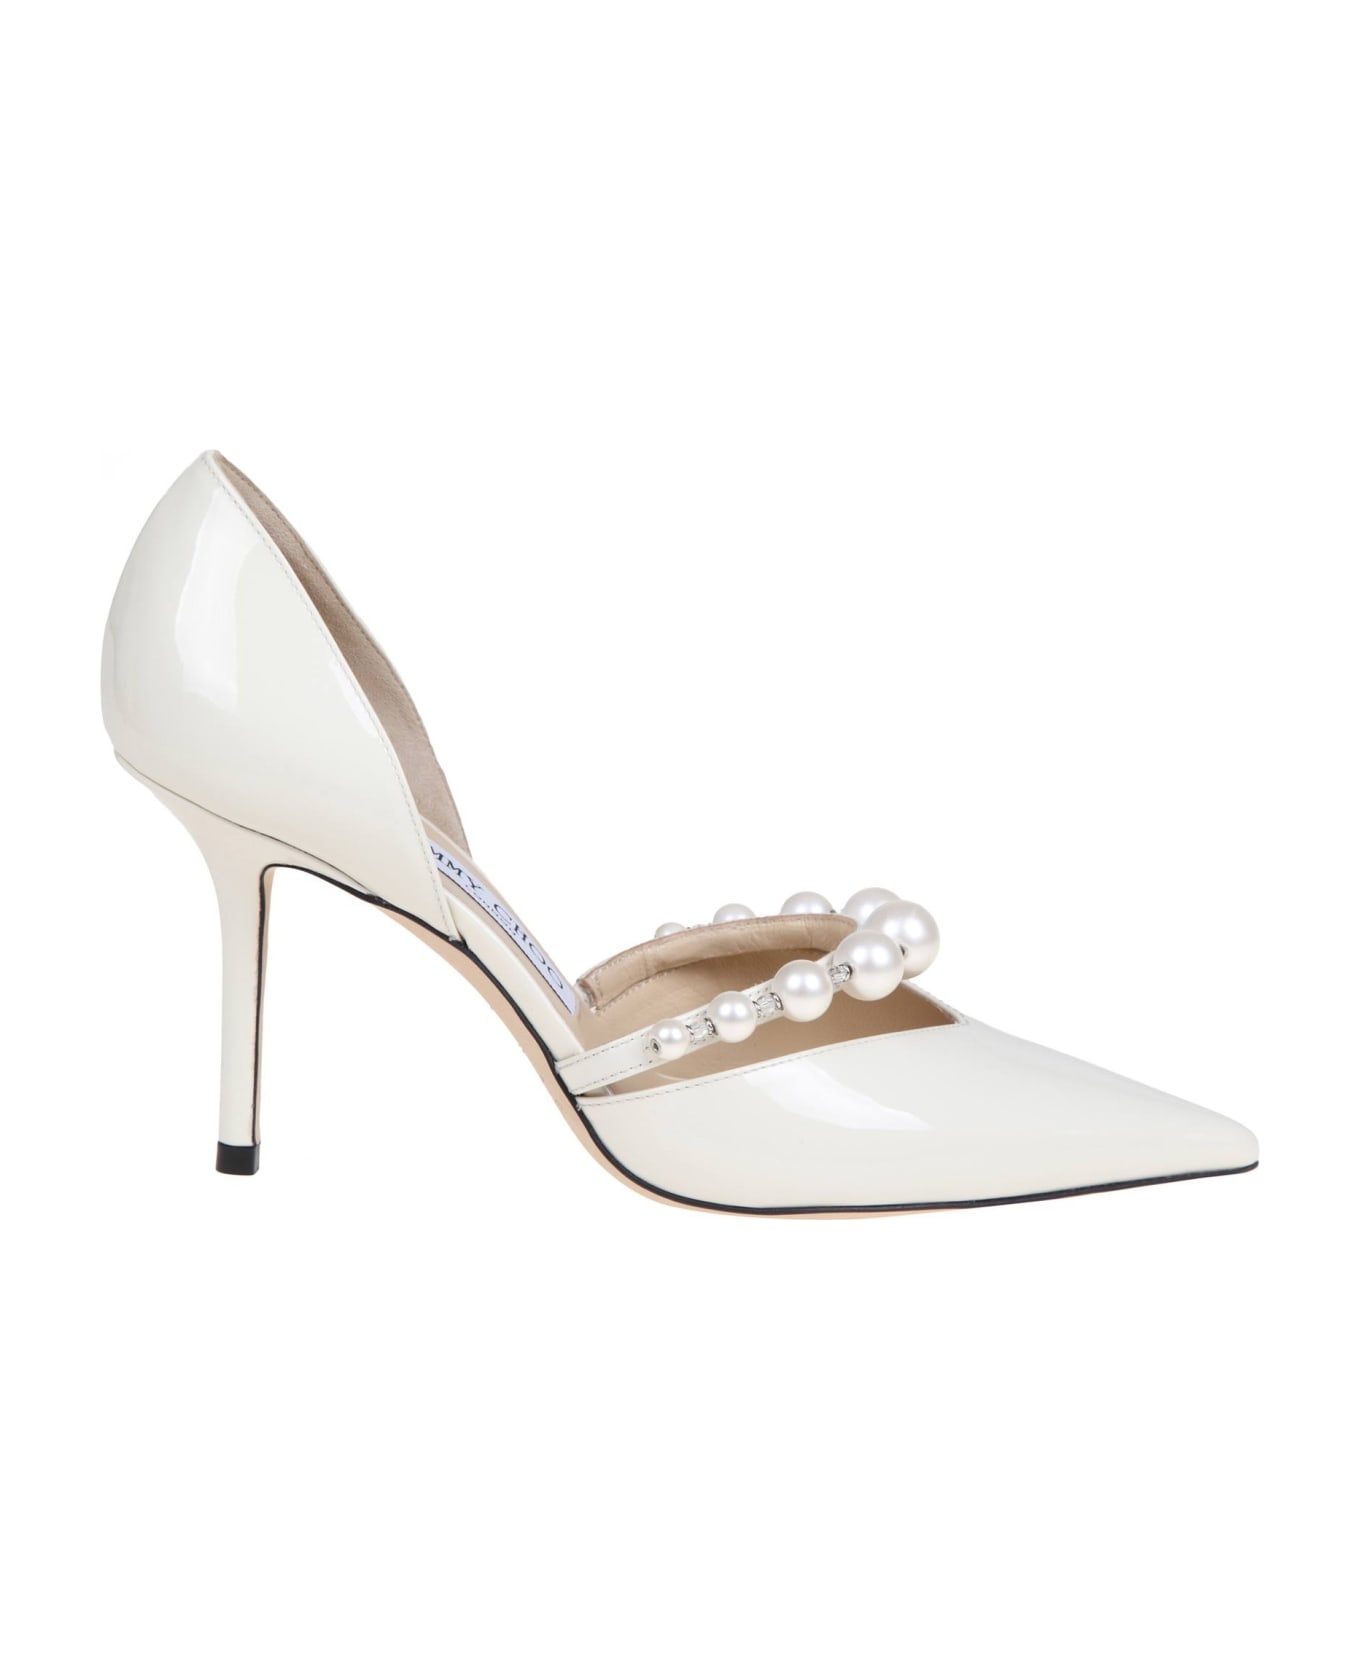 Aurelie 85 Patent Leather Pumps With Applied Pearls - 1